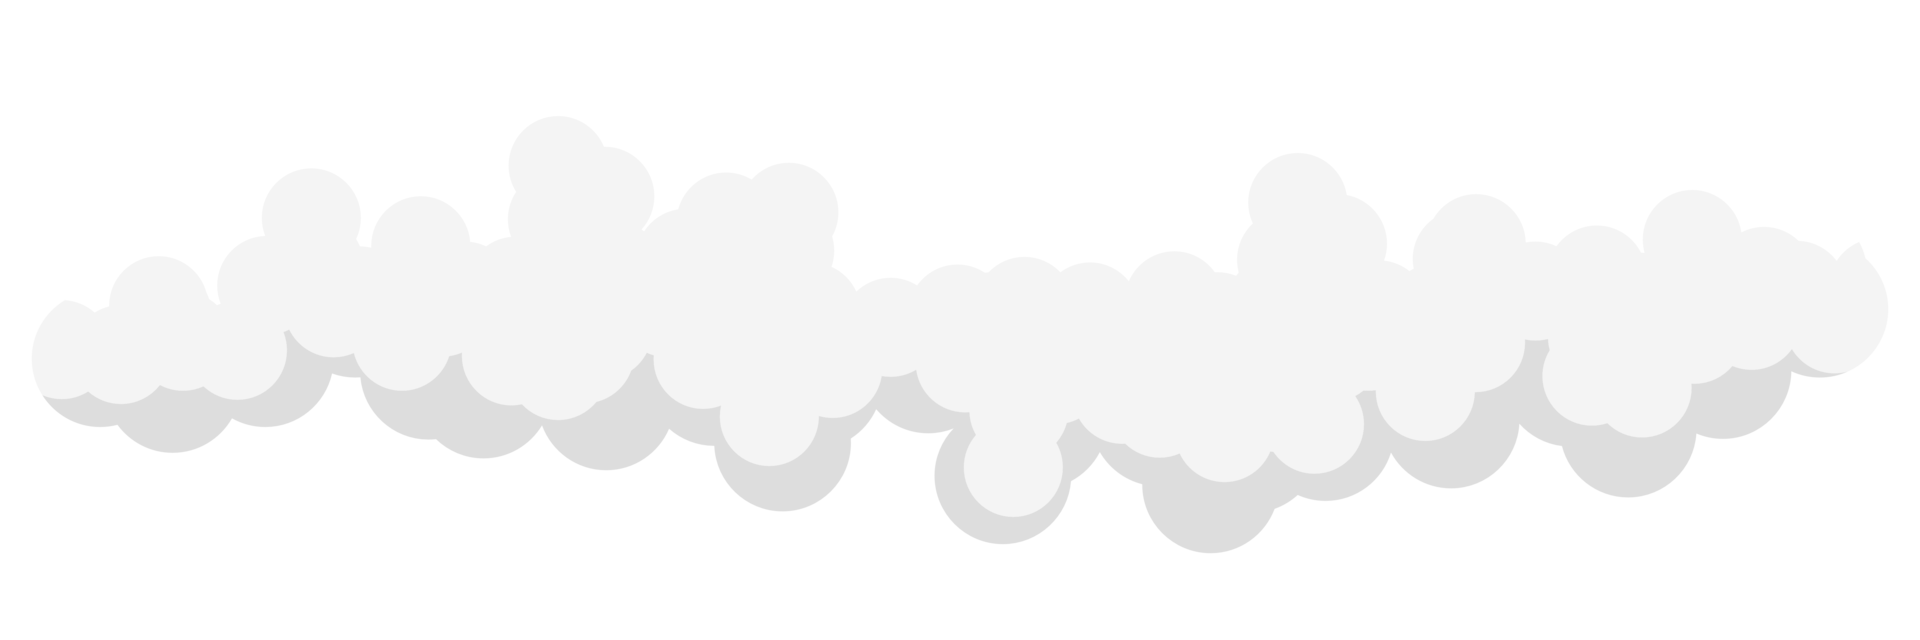 Free cartoon cloud illustration 13166978 PNG with Transparent Background